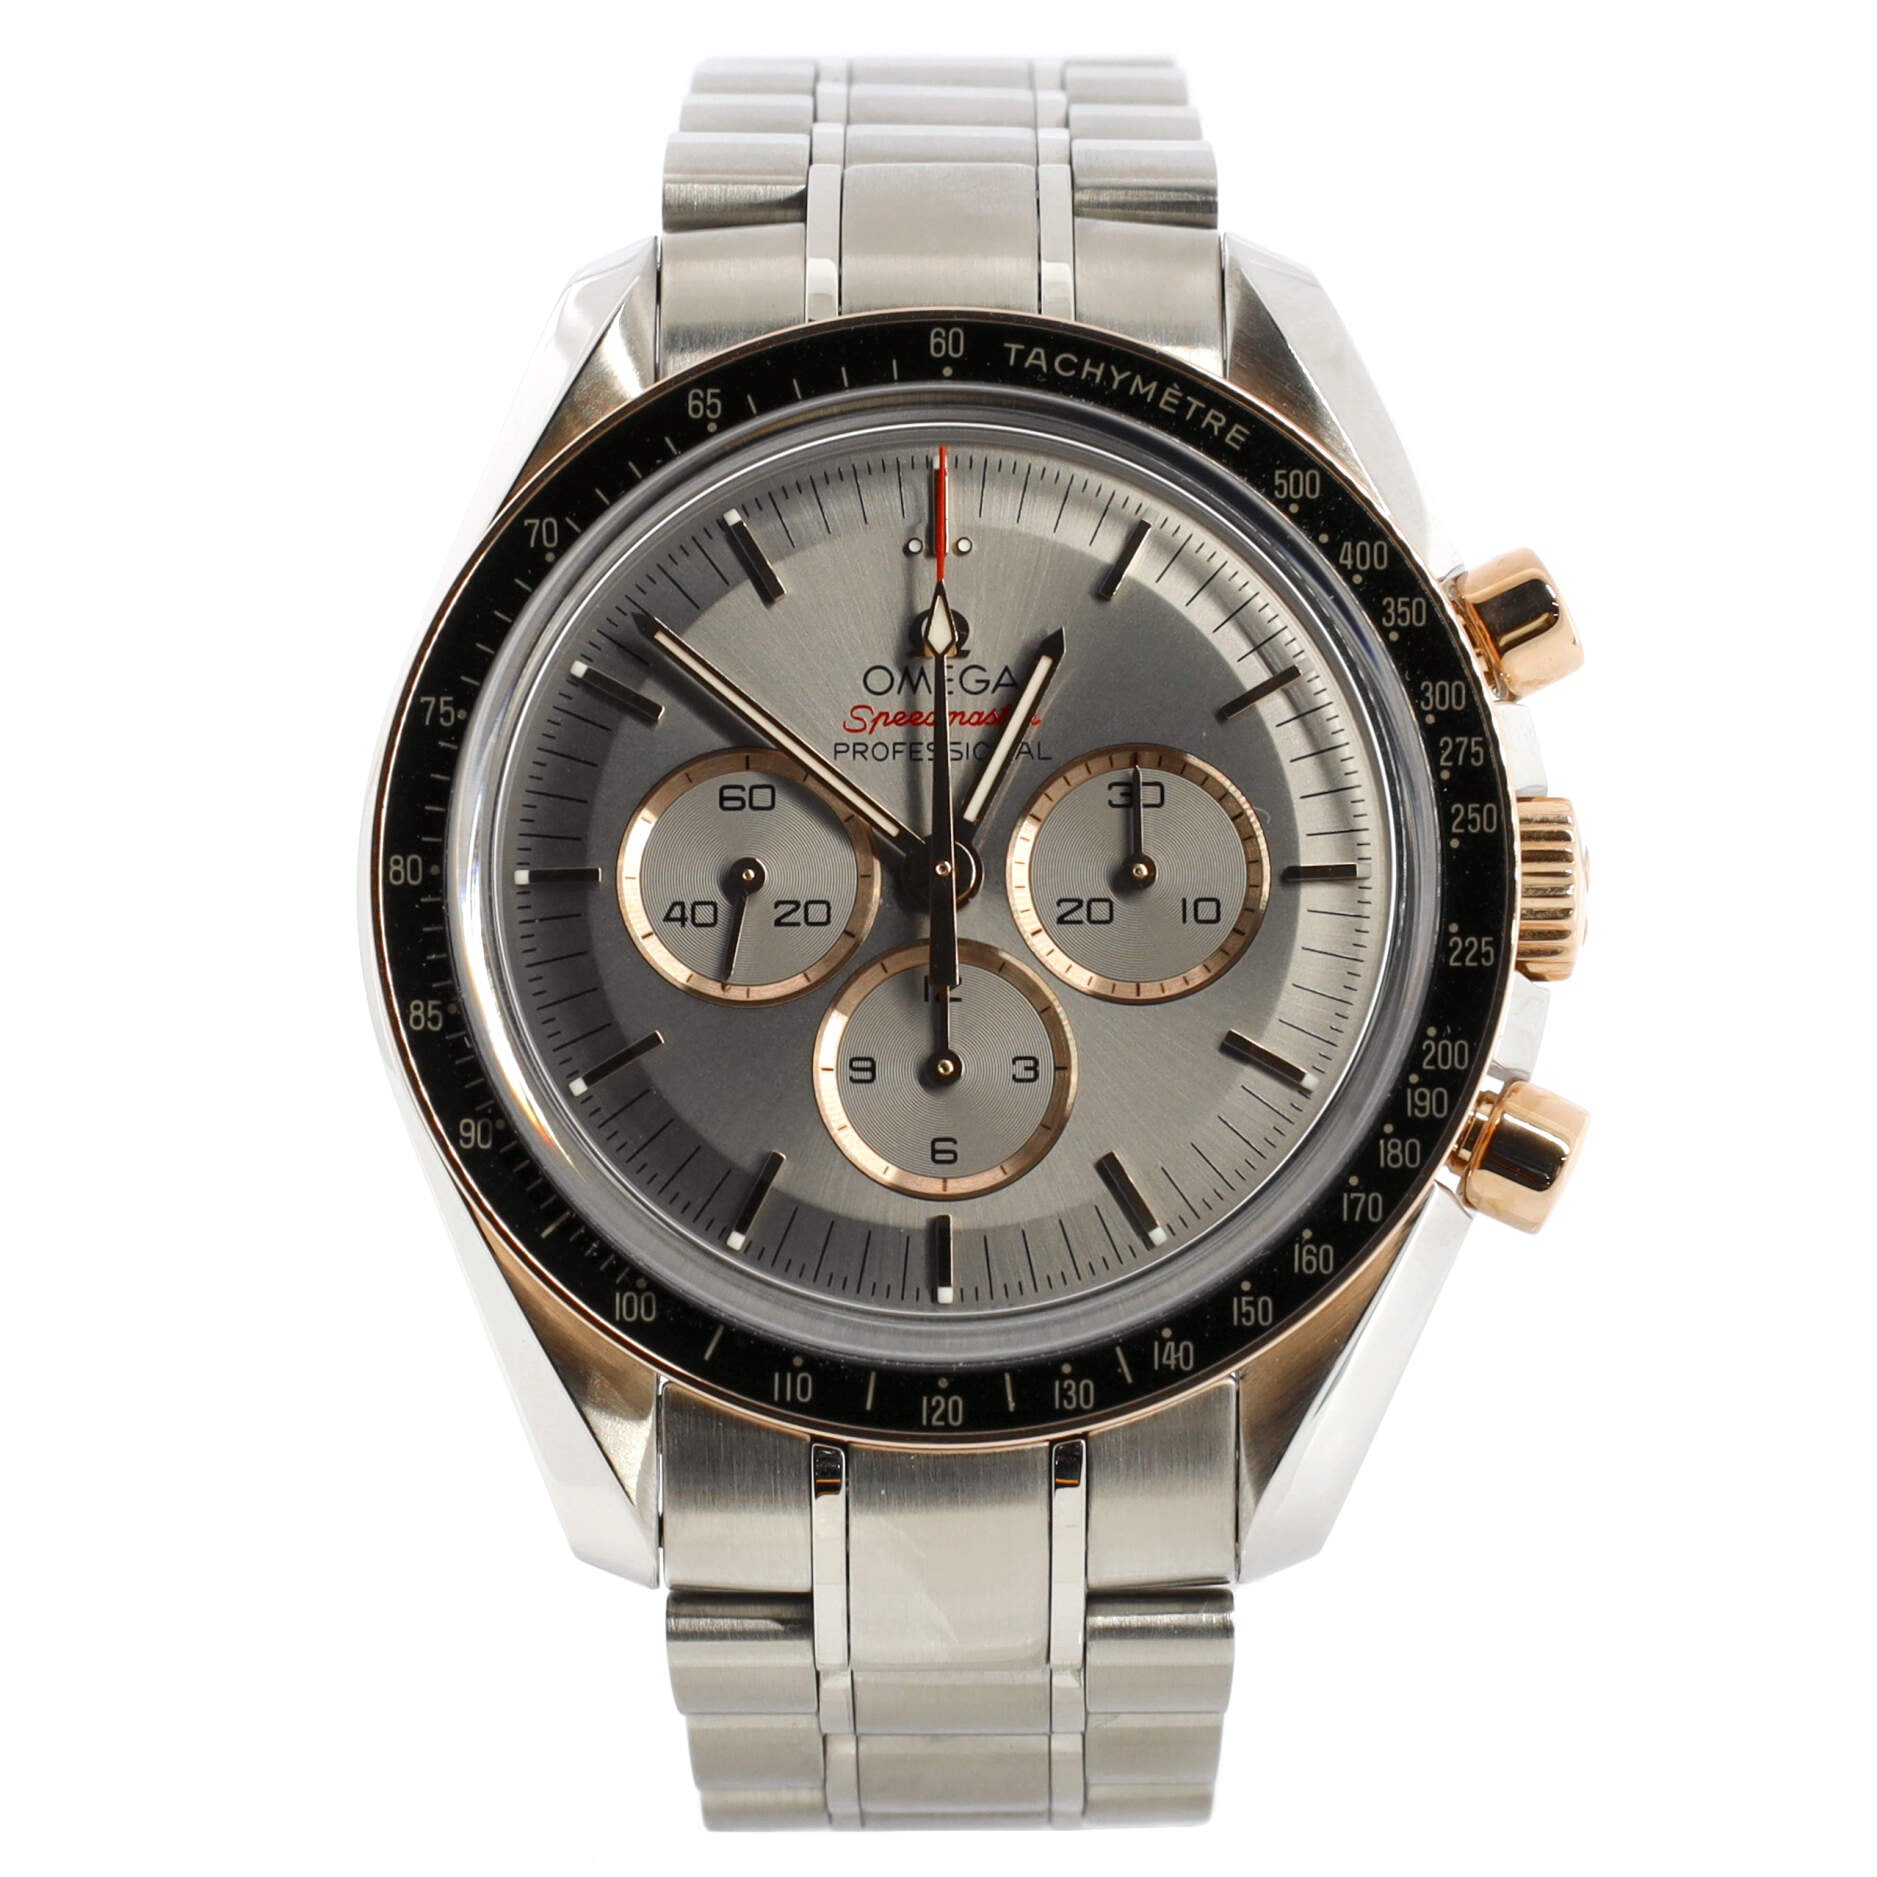 Speedmaster Professional Tokyo Olympic Chronograph Limited Edition Manual Watch (52220423006001)